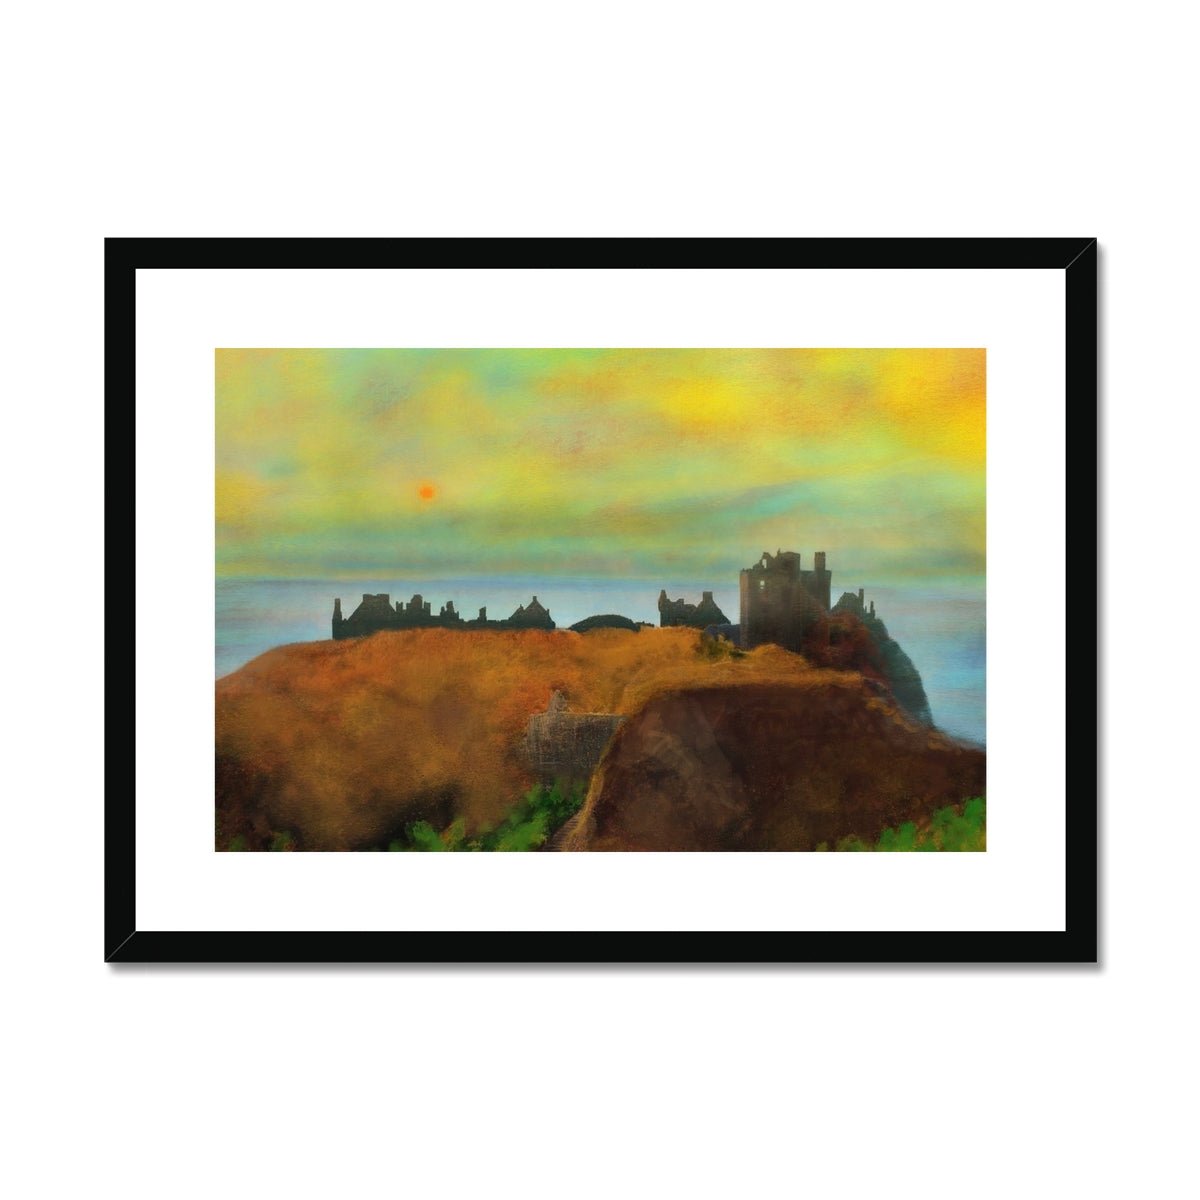 Dunnottar Castle Dusk Painting | Framed & Mounted Prints From Scotland-Framed & Mounted Prints-Historic & Iconic Scotland Art Gallery-A2 Landscape-Black Frame-Paintings, Prints, Homeware, Art Gifts From Scotland By Scottish Artist Kevin Hunter